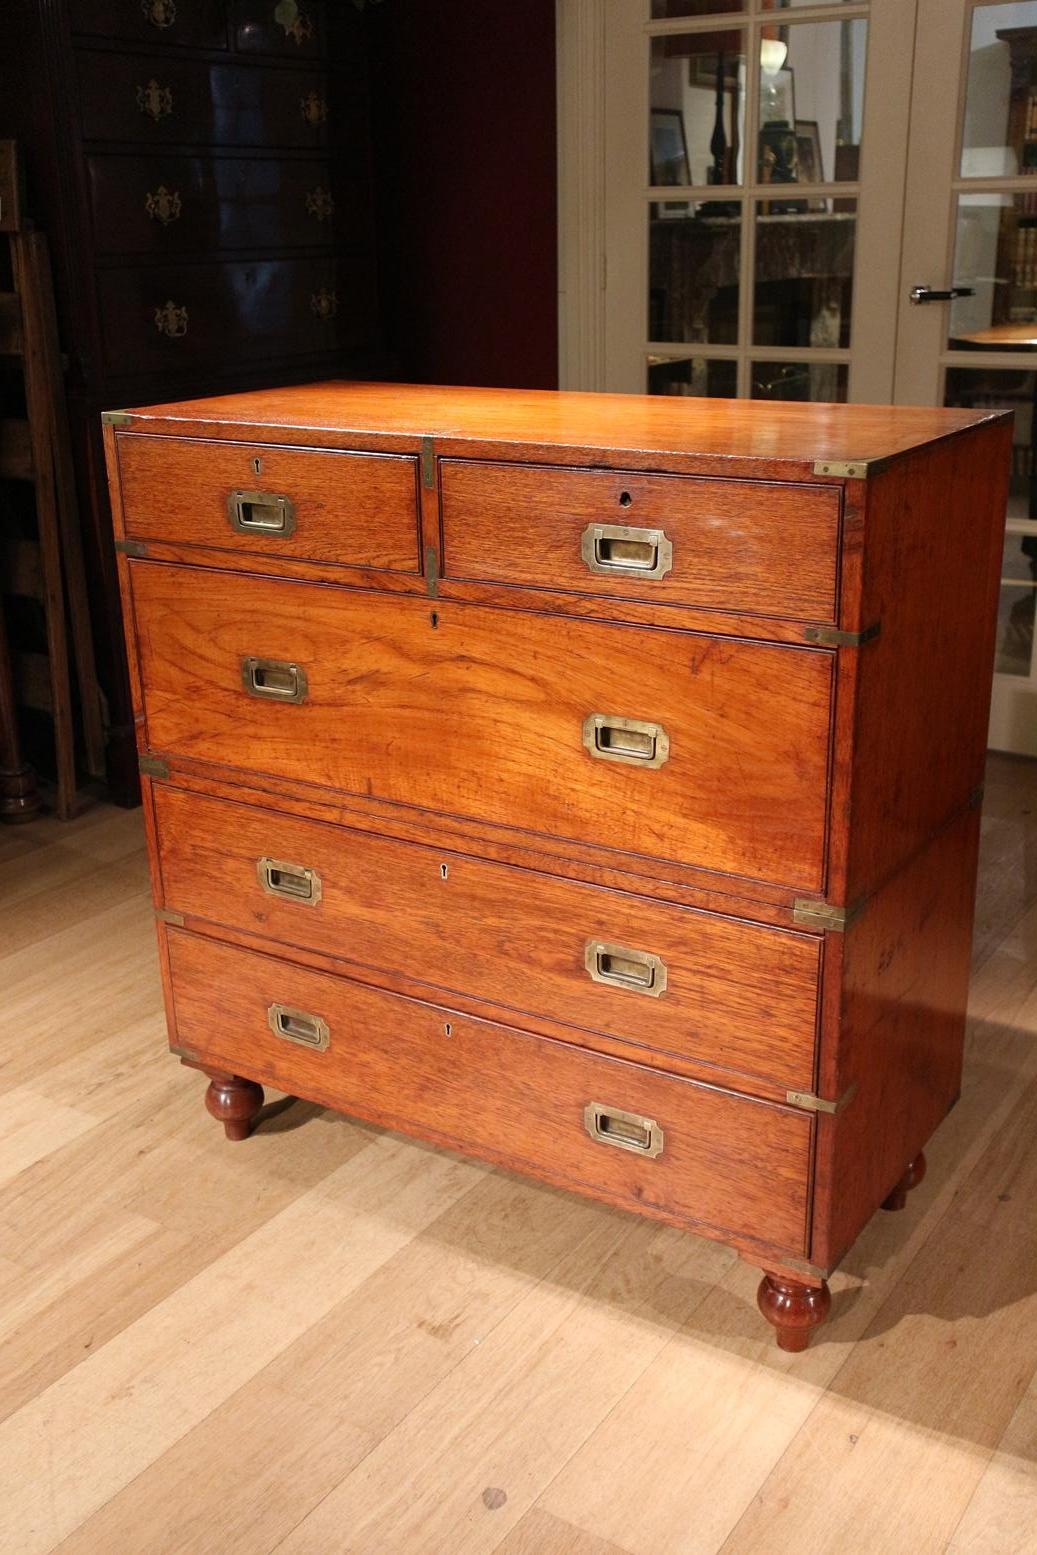 Beautiful antique campaign / military chest of drawers consisting of 2 parts. The cabinet is entirely in original condition with original removable legs. The chest of drawers has the perfect look. Warm (original finish) color and signs of use. With